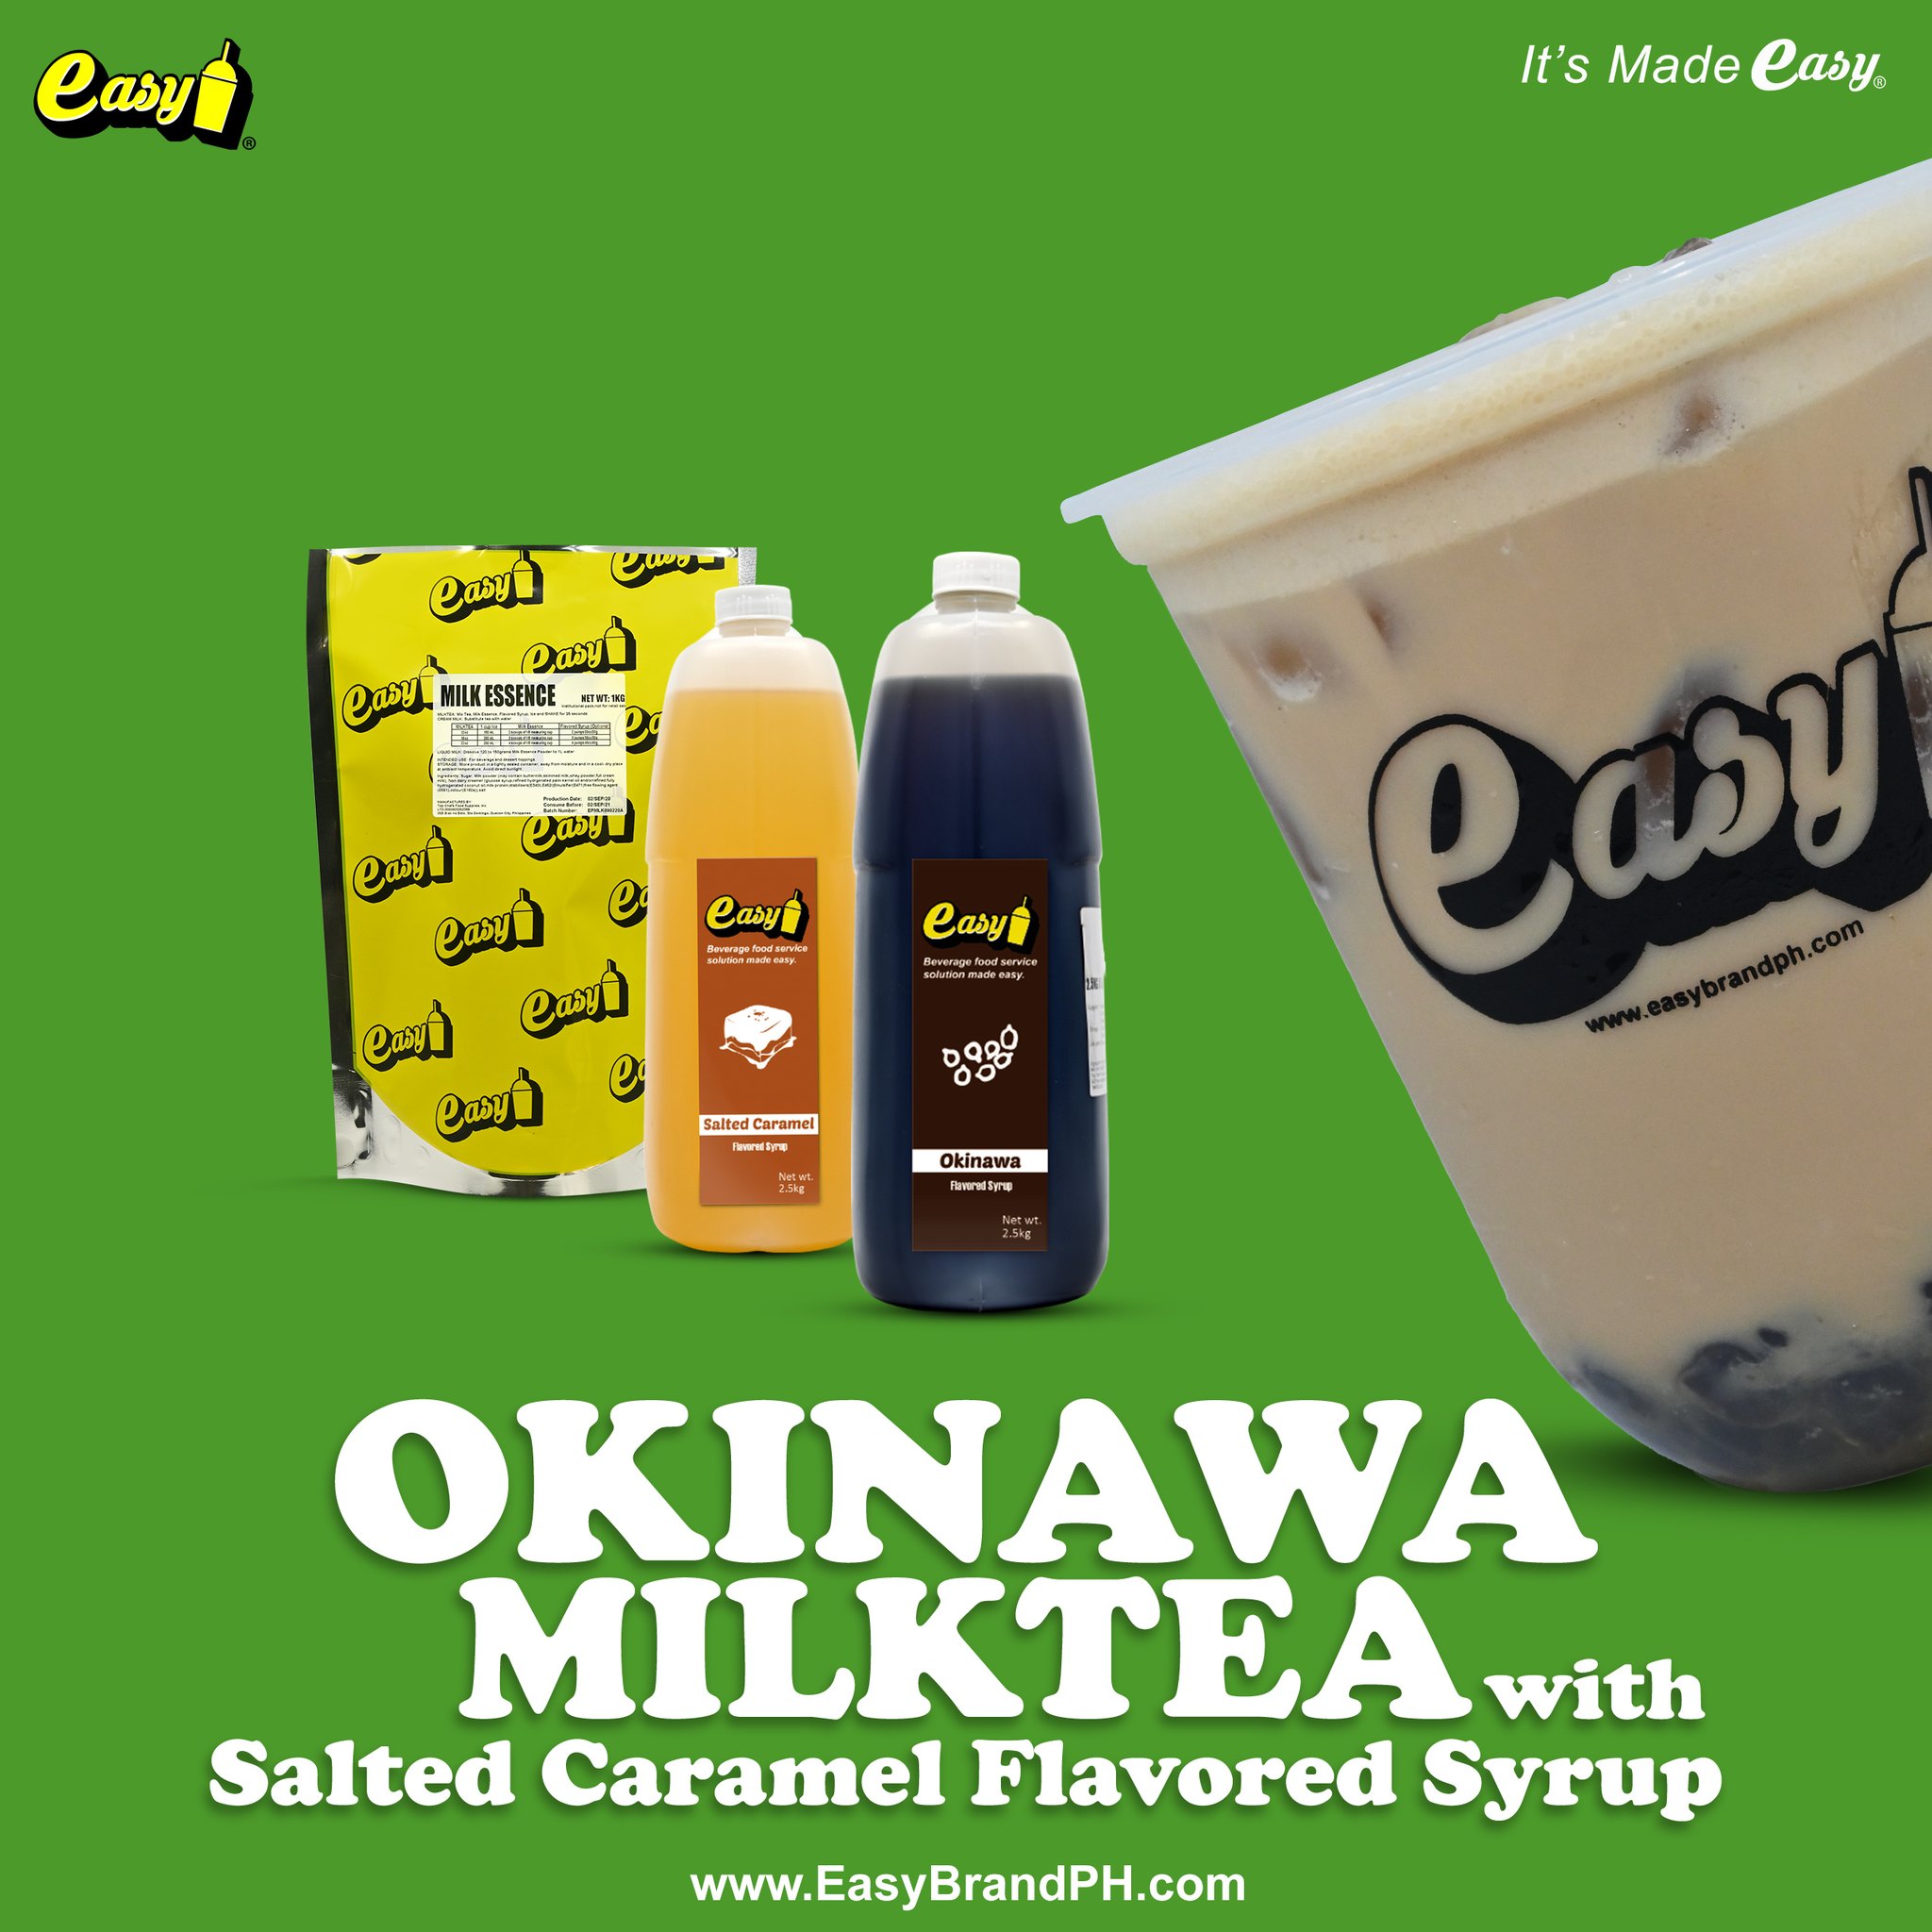 Okinawa Milktea with Salted Caramel Flavored Syrup